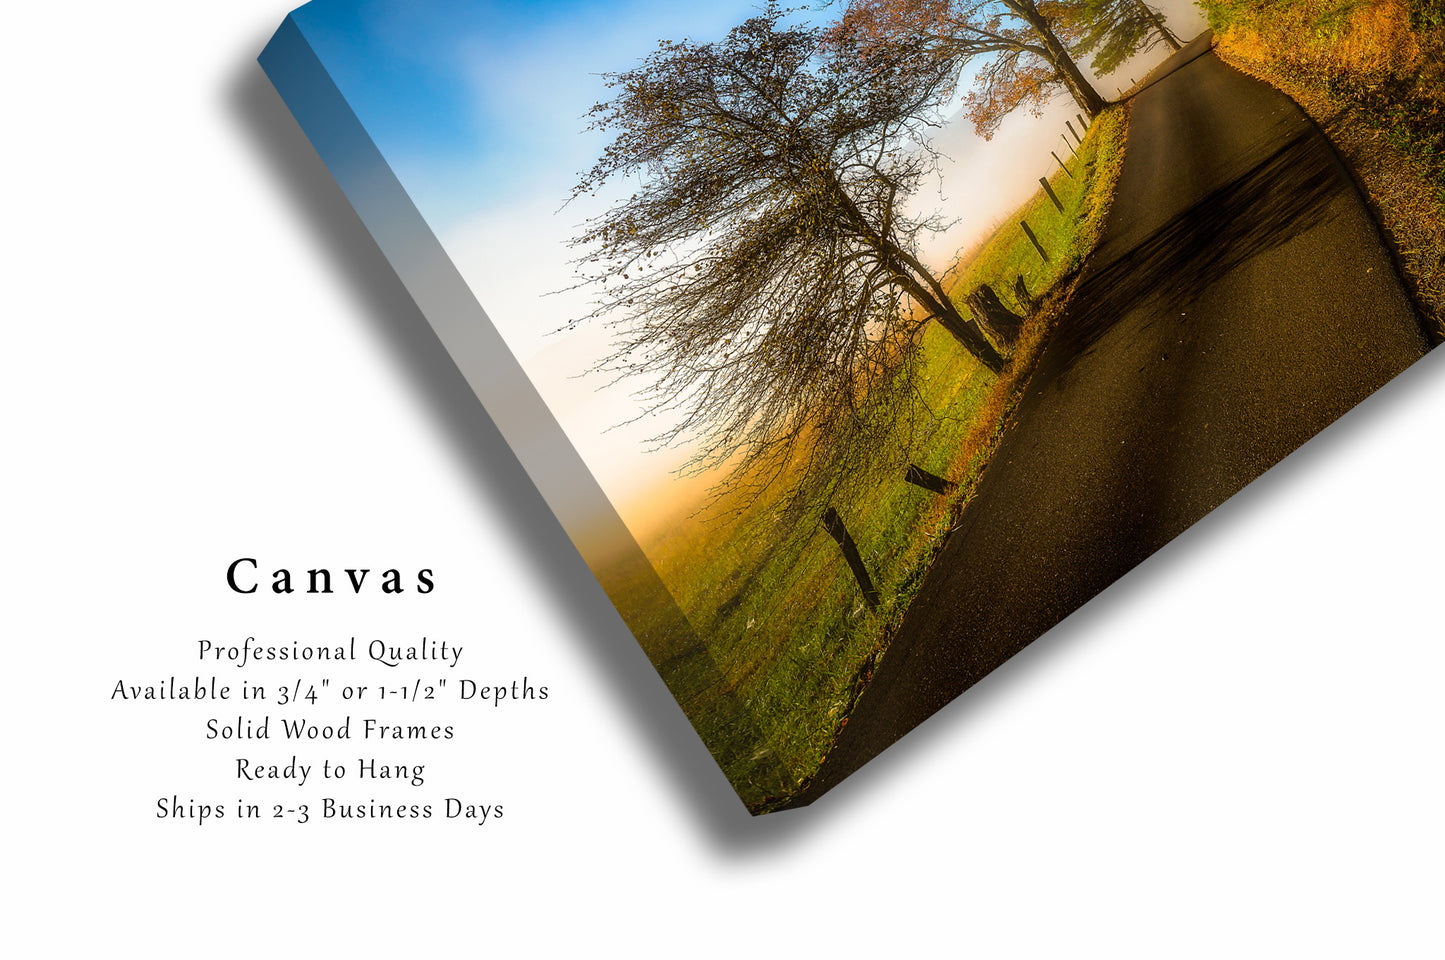 Canvas Wall Art | Cades Cove Loop Picture | Great Smoky Mountains Gallery Wrap | Tennessee Photography | Nature Decor